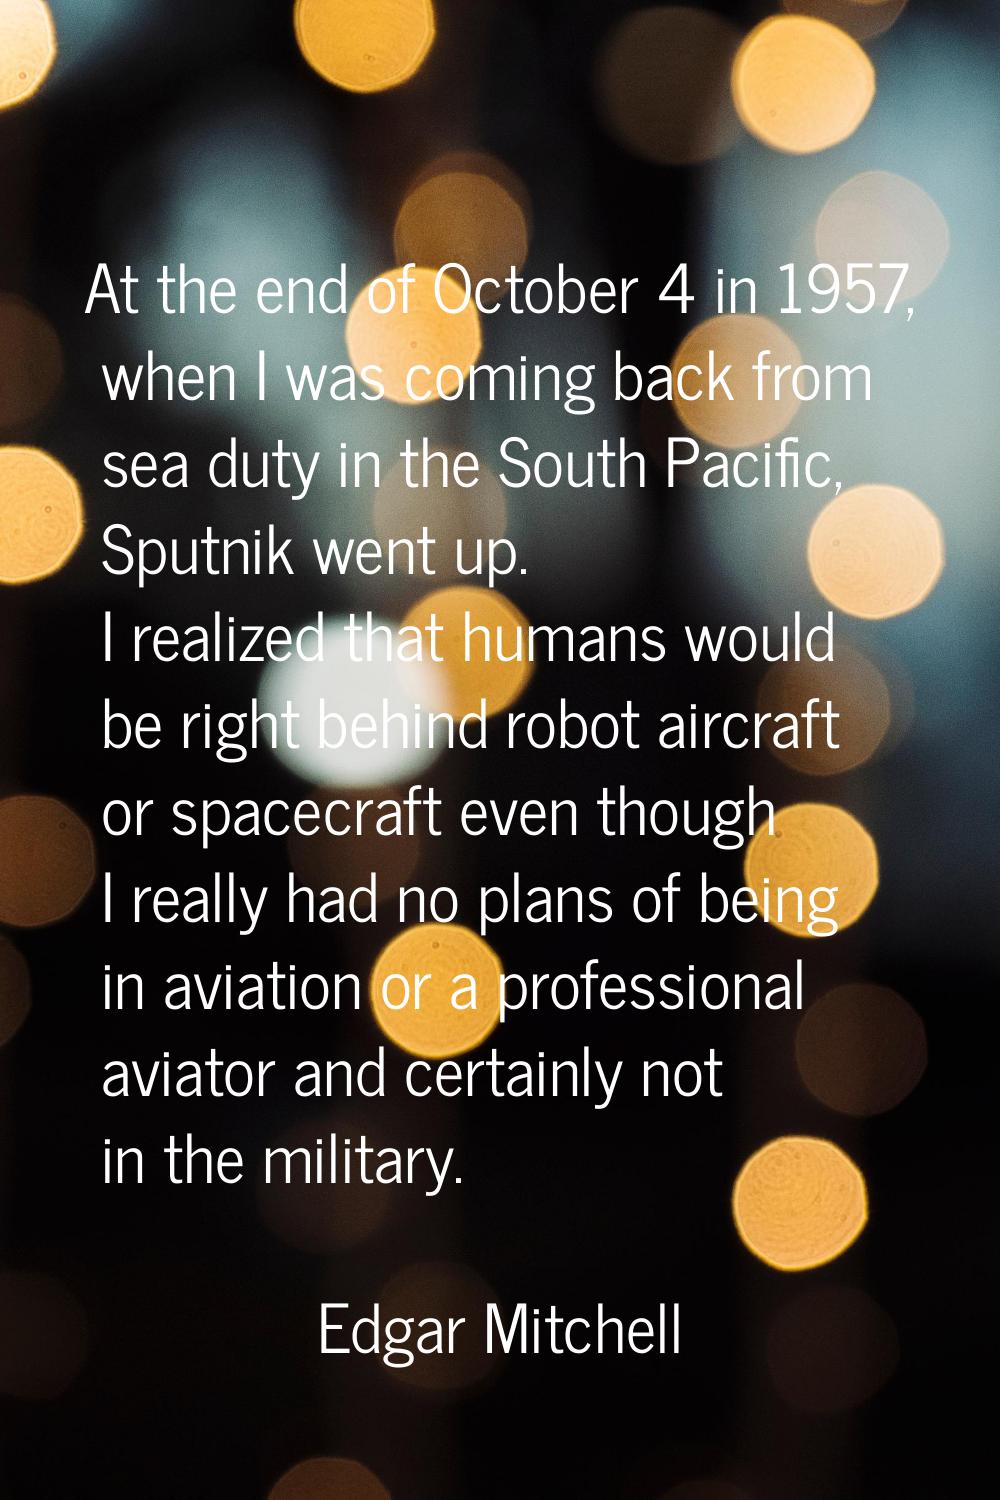 At the end of October 4 in 1957, when I was coming back from sea duty in the South Pacific, Sputnik